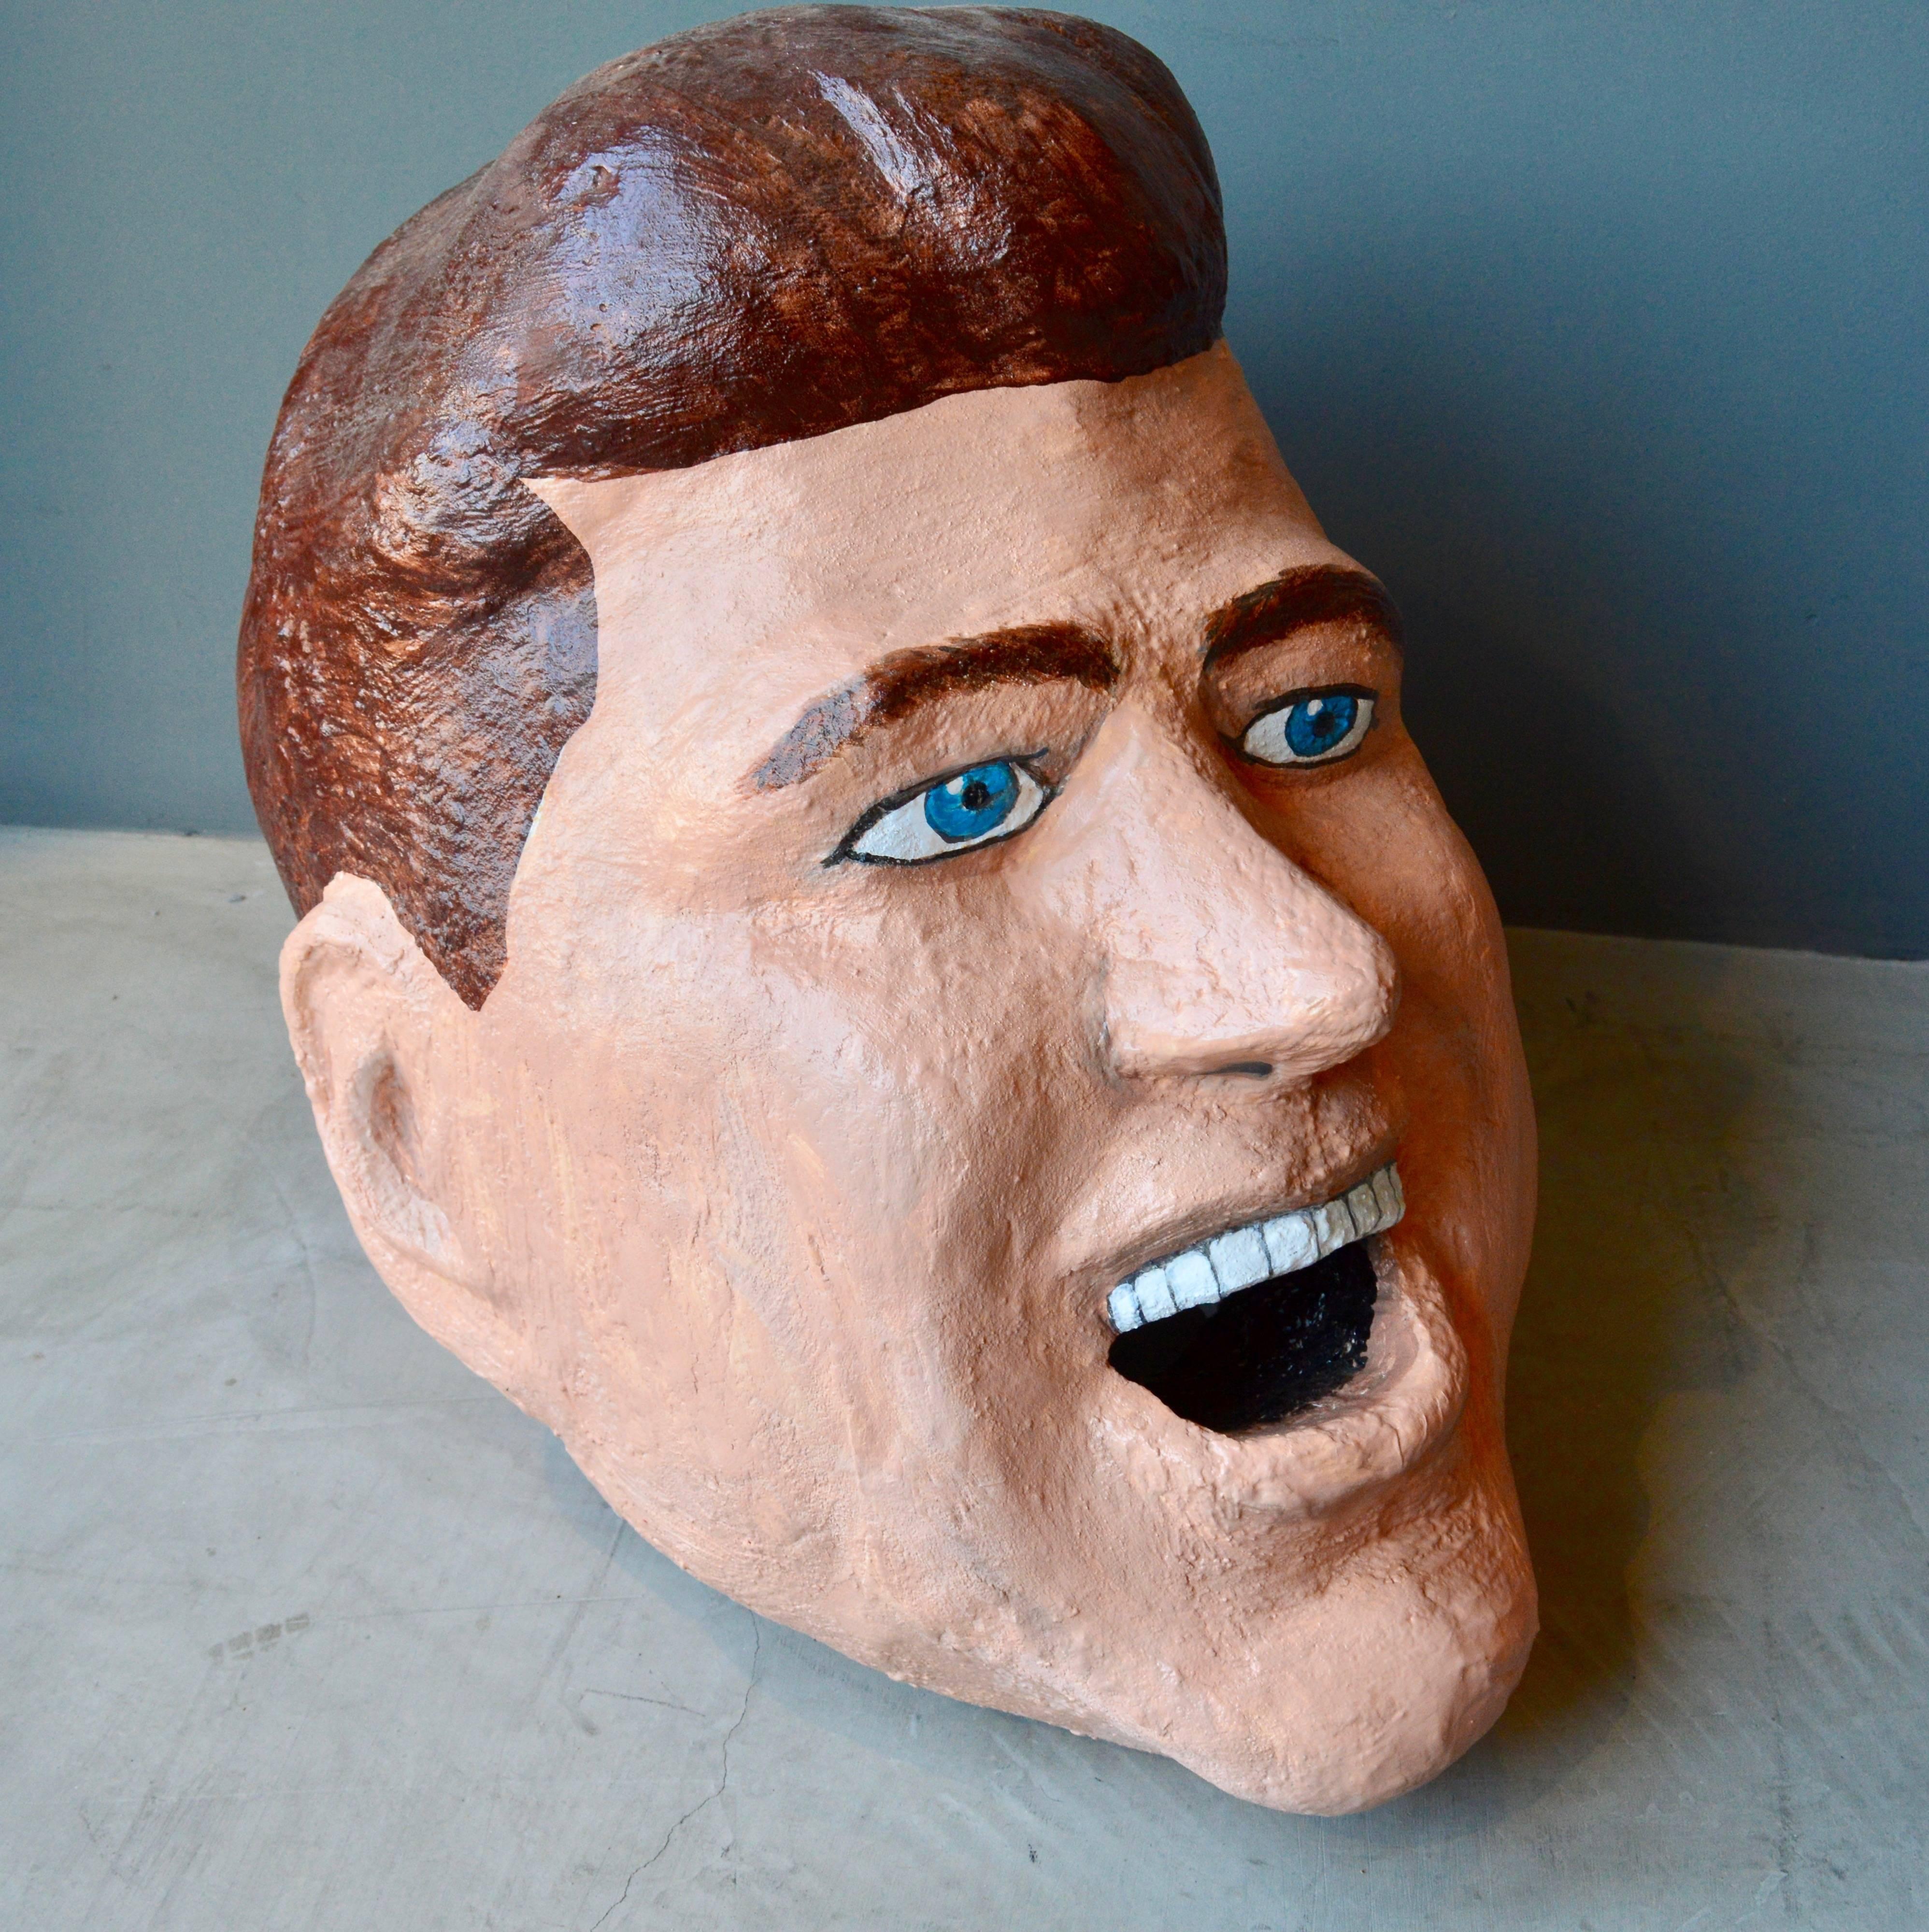 Monumental sculptural head of President John F. Kennedy. Made out of foam, paste and hand-painted. Able to be worn on the head. Looks great as a free floating sculpture. Clinton and George Bush also available (Nixon sold). Very unique object.